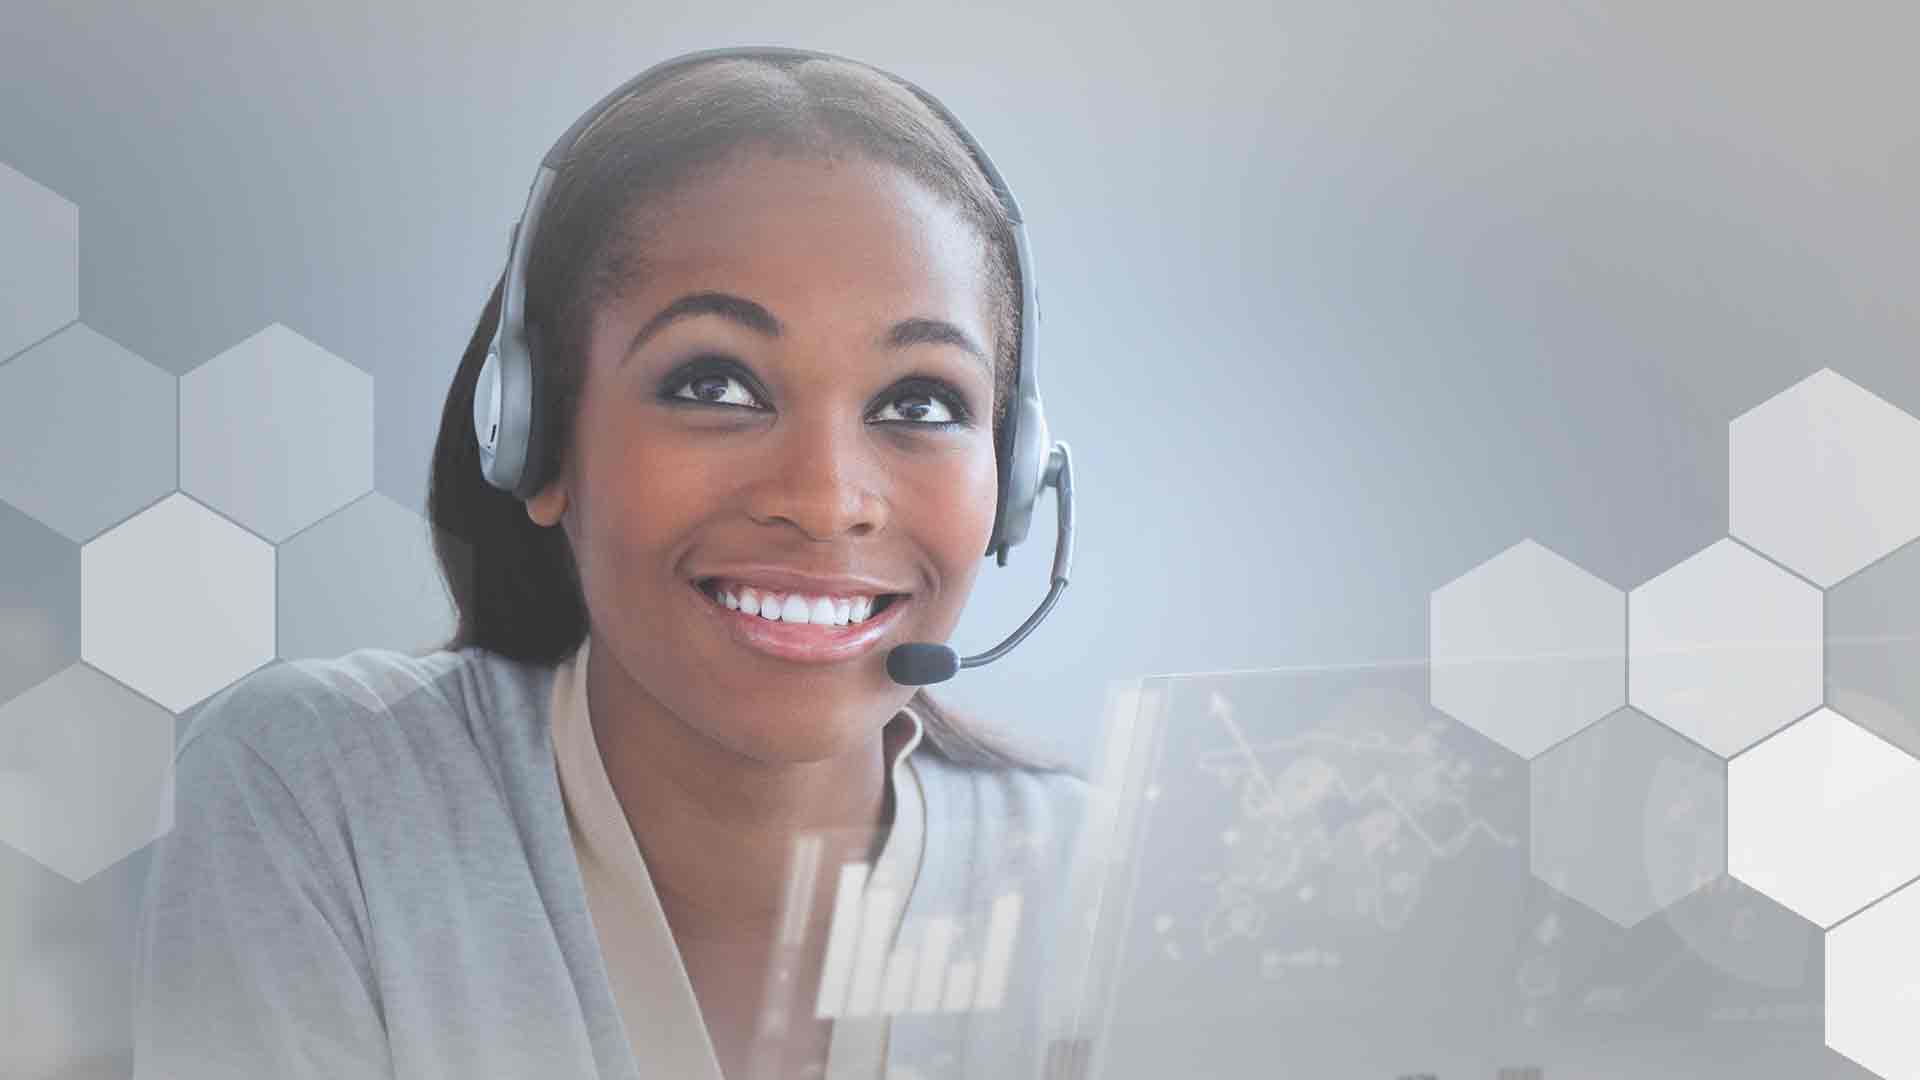 call center agents